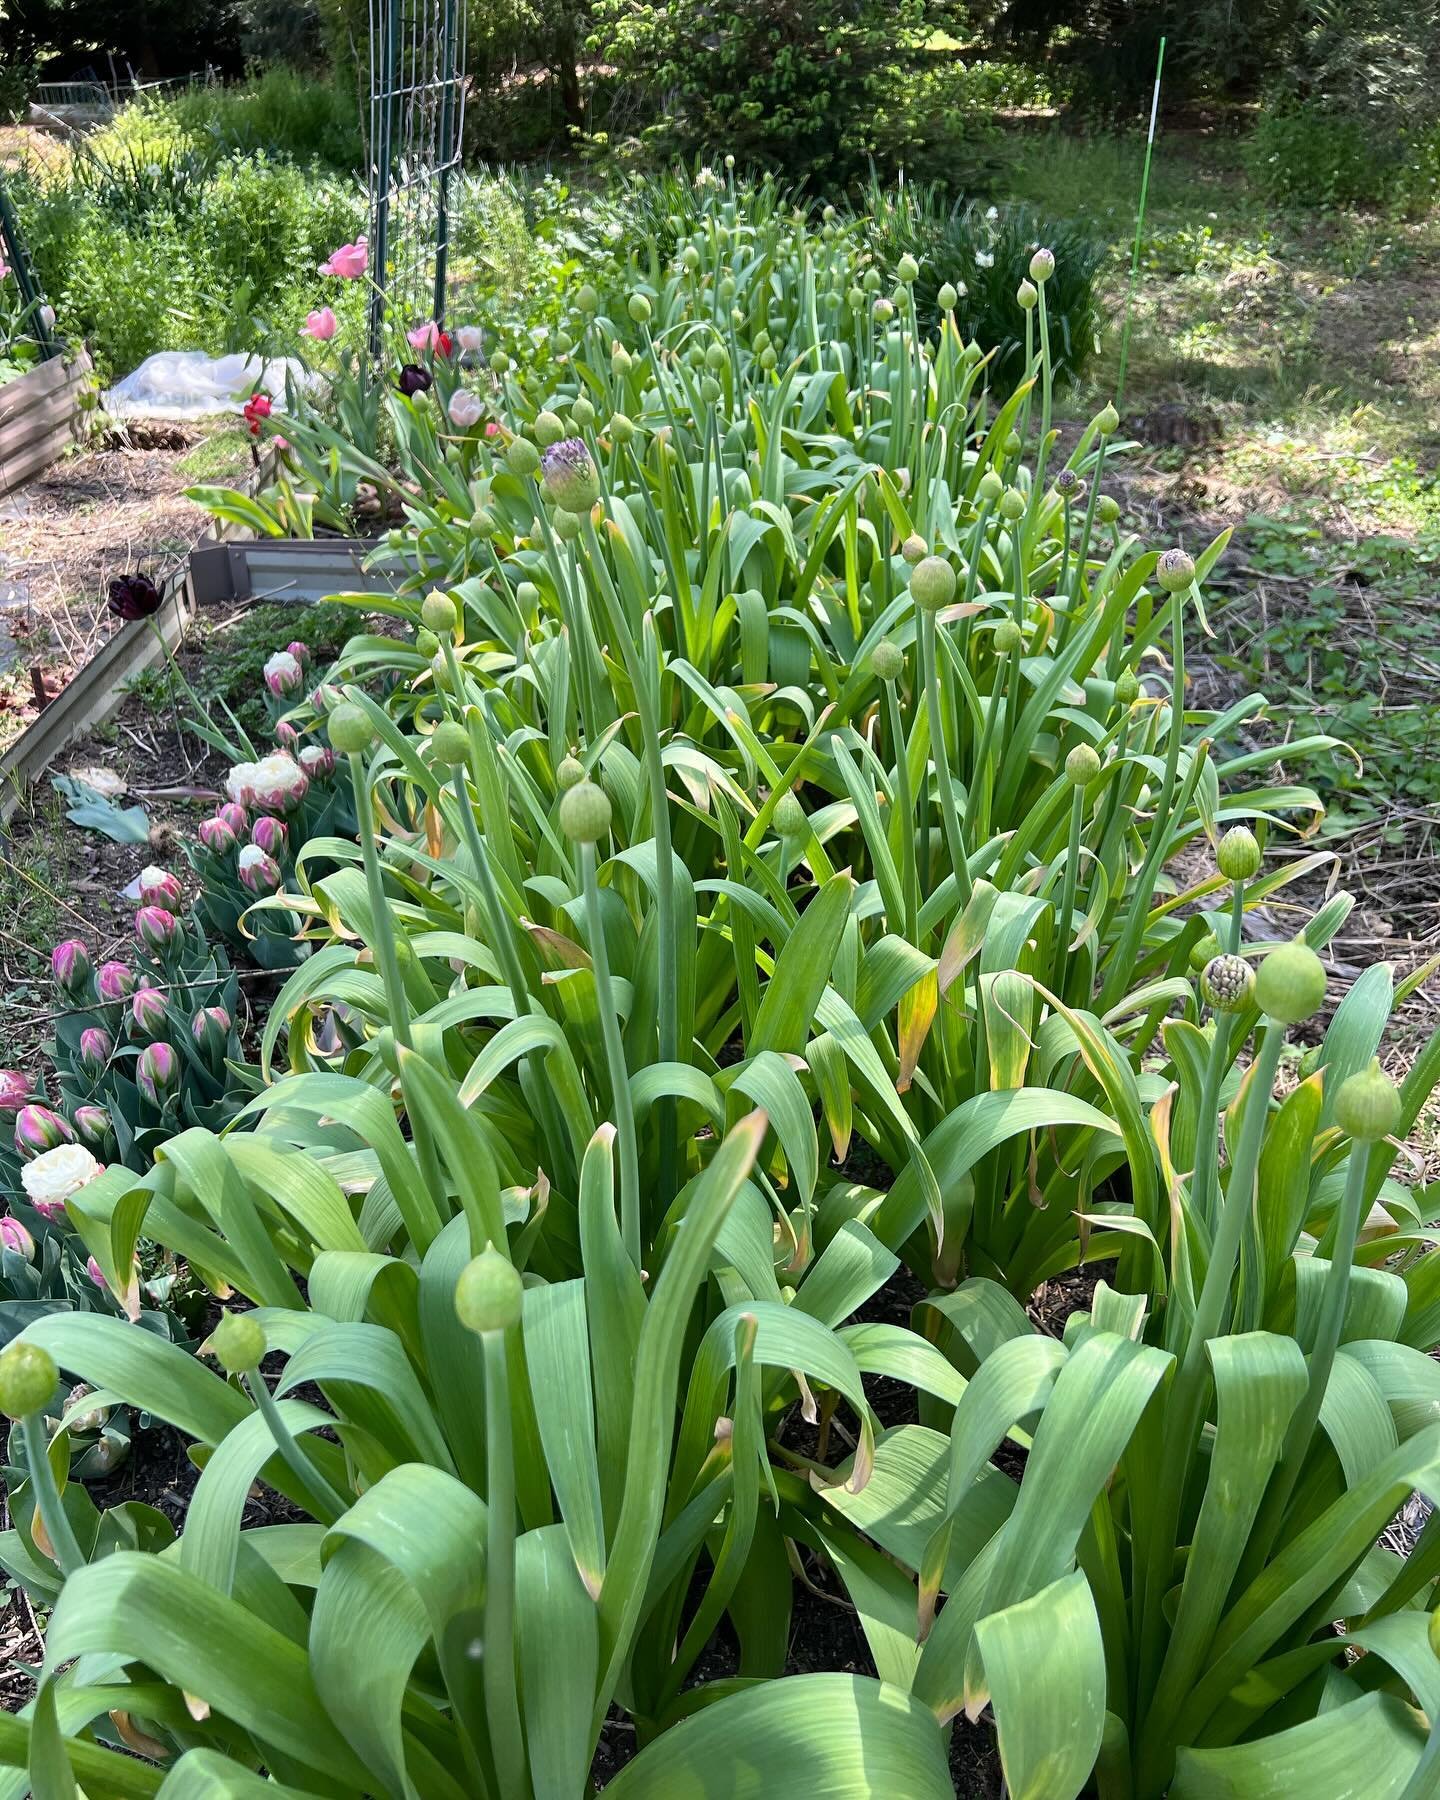 The Allium is coming on strong just in time for Mother&rsquo;s Day next week!!! If you haven&rsquo;t pre-ordered yet, head to our shop!  Pick ups will be next Saturday and Sunday mornings.  Last round of Spring CSAs hit this week. For annual members 